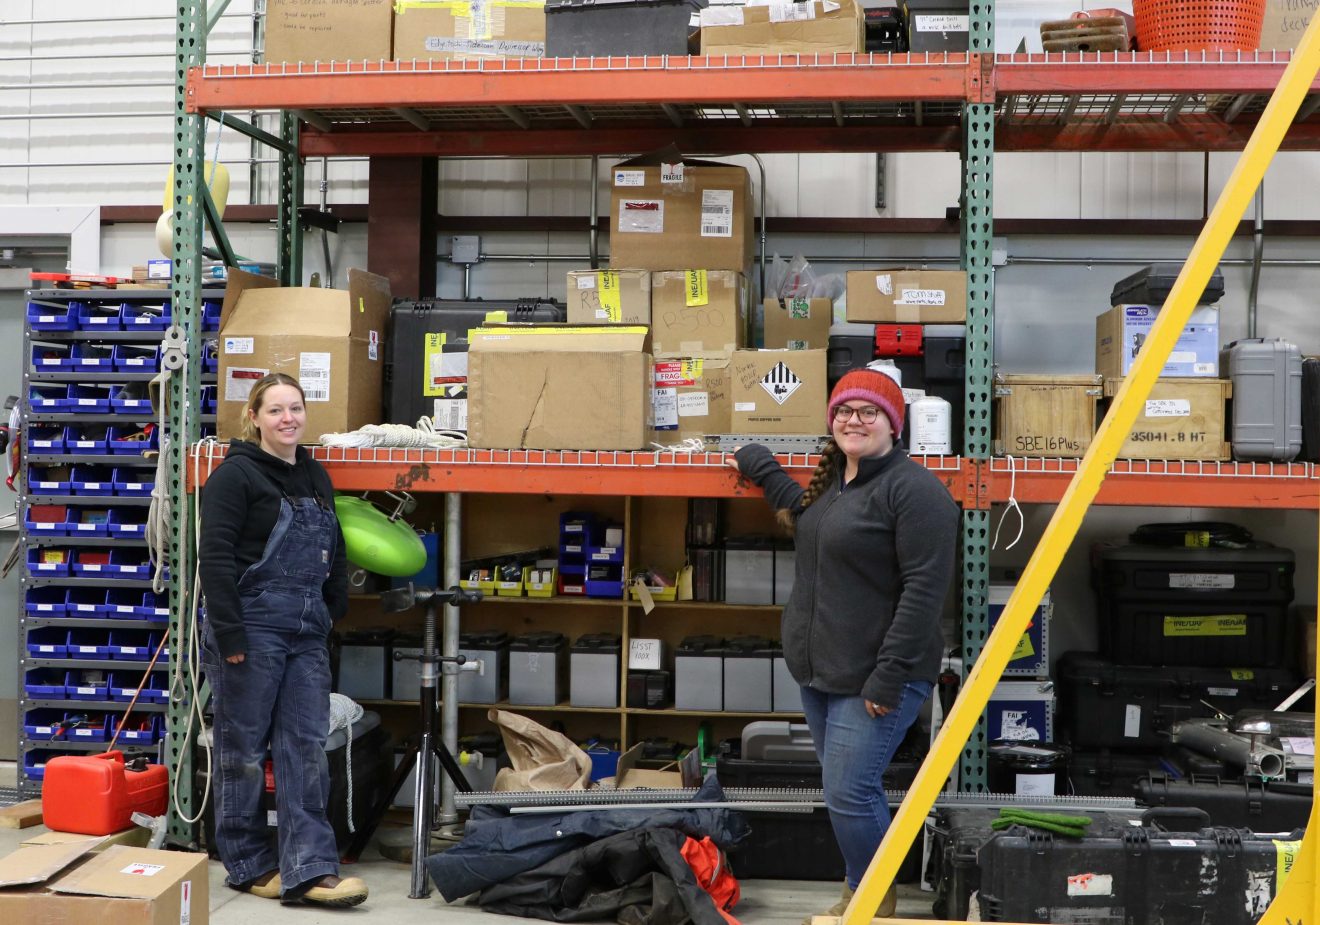 Two women stand in a warehouse in front of many shelves filled with boxes. Gear and gear boxes are piled around them.